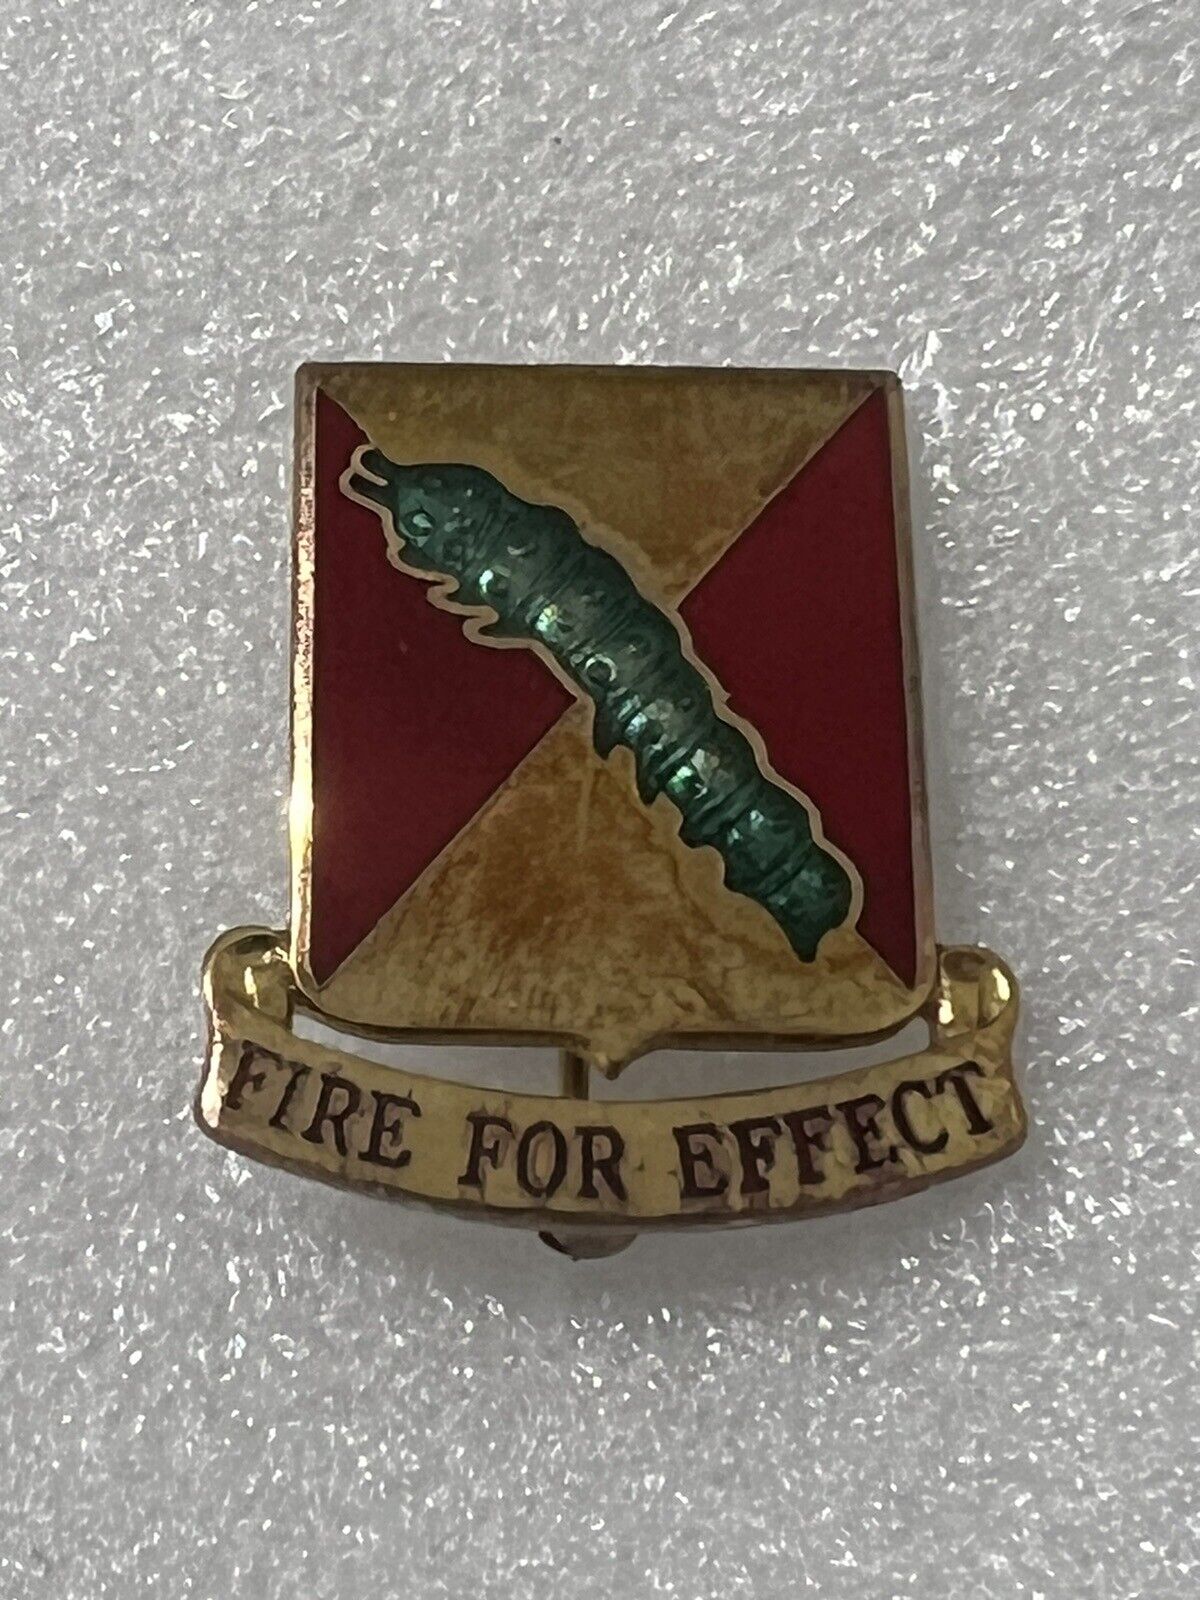 US Army 51st Artillery Fire For Effect DUI Pin Crest